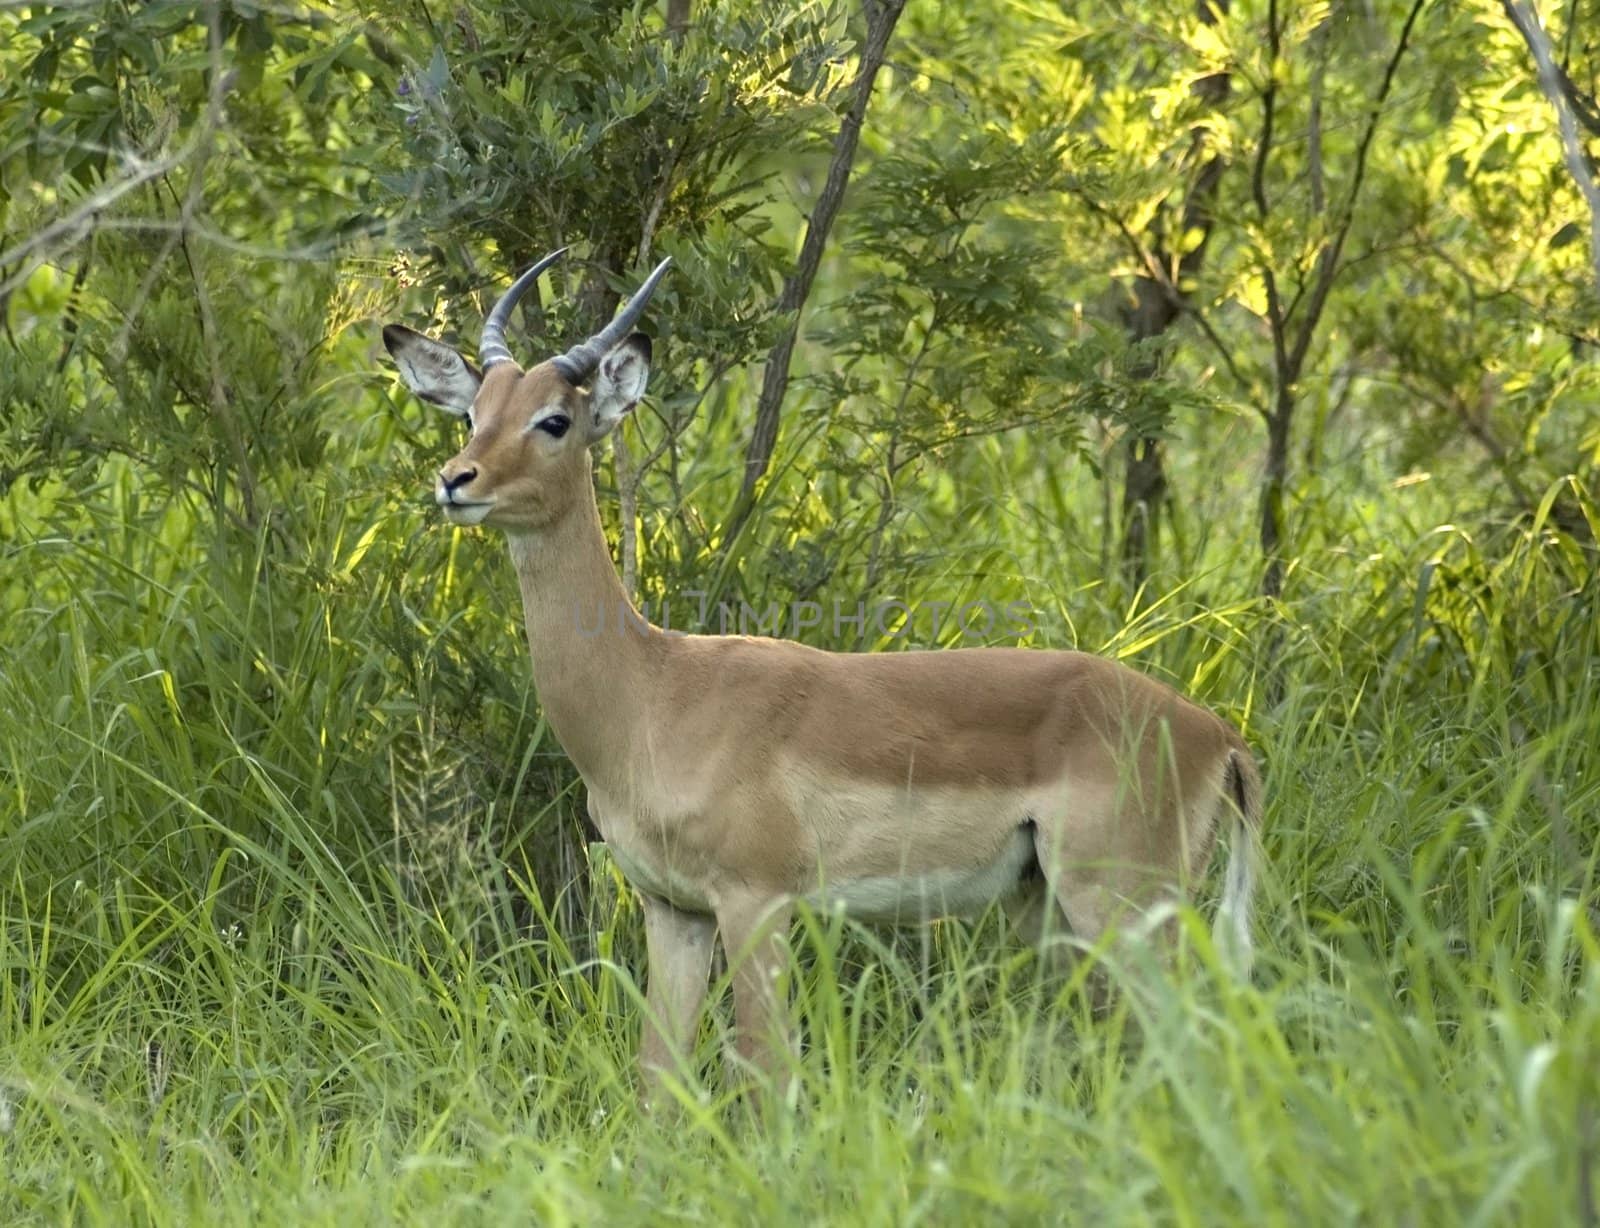 A male impala in the Kruger Park, South Africa, during the rainy season.